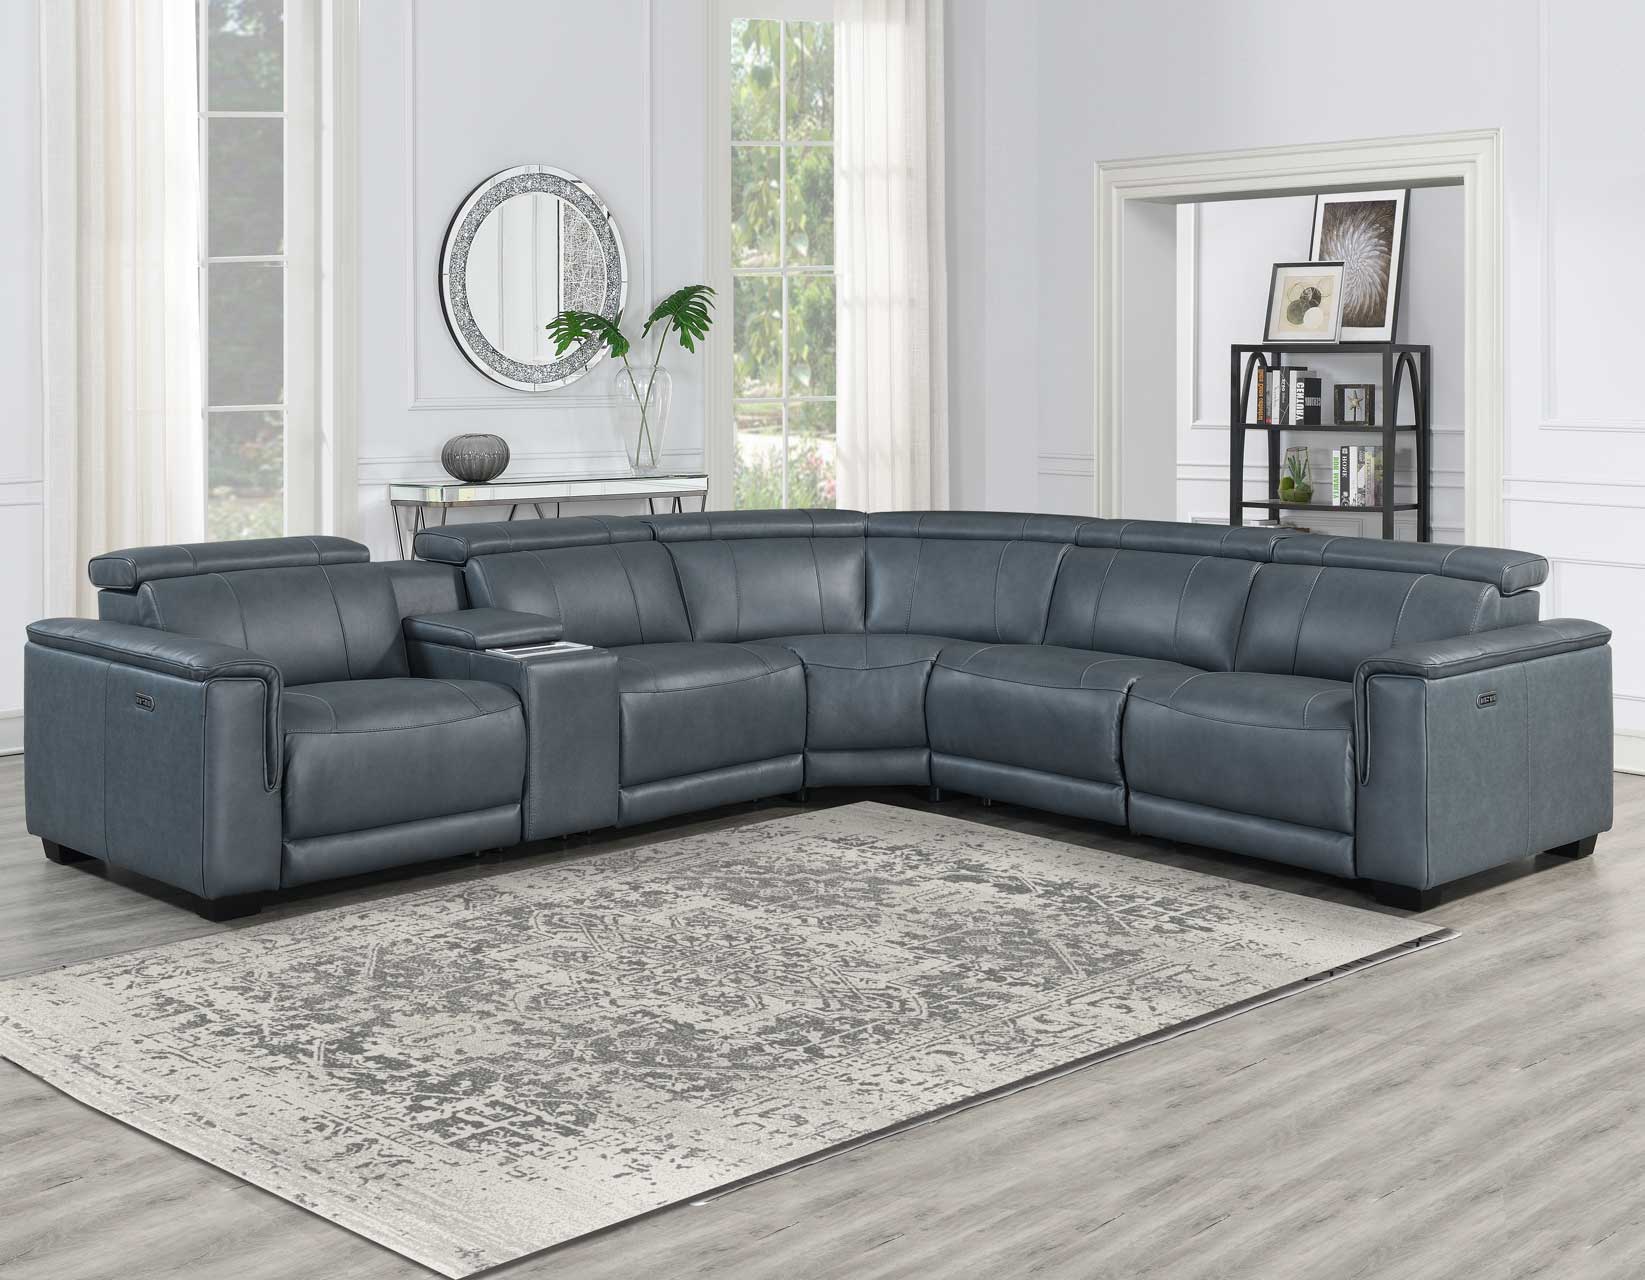 Lorenzo 6-Piece Dual-Power Reclining Modular Leather Sectional, Grey by Steve Silver